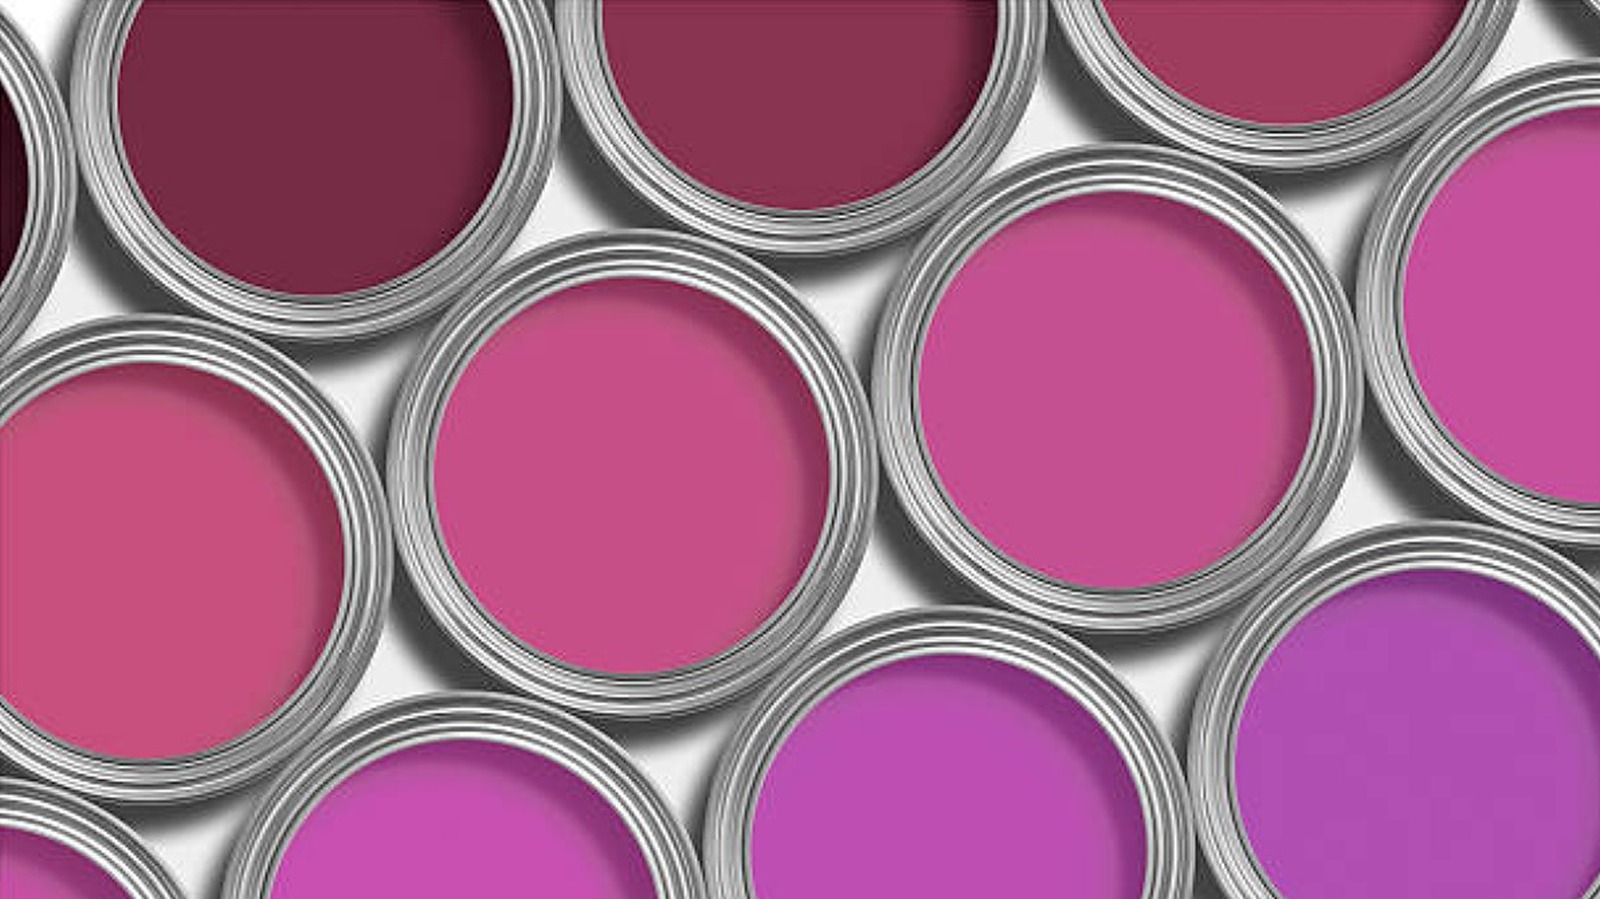 15 Royal Shades Of Purple Paint That You'll Want To Use In Your Home